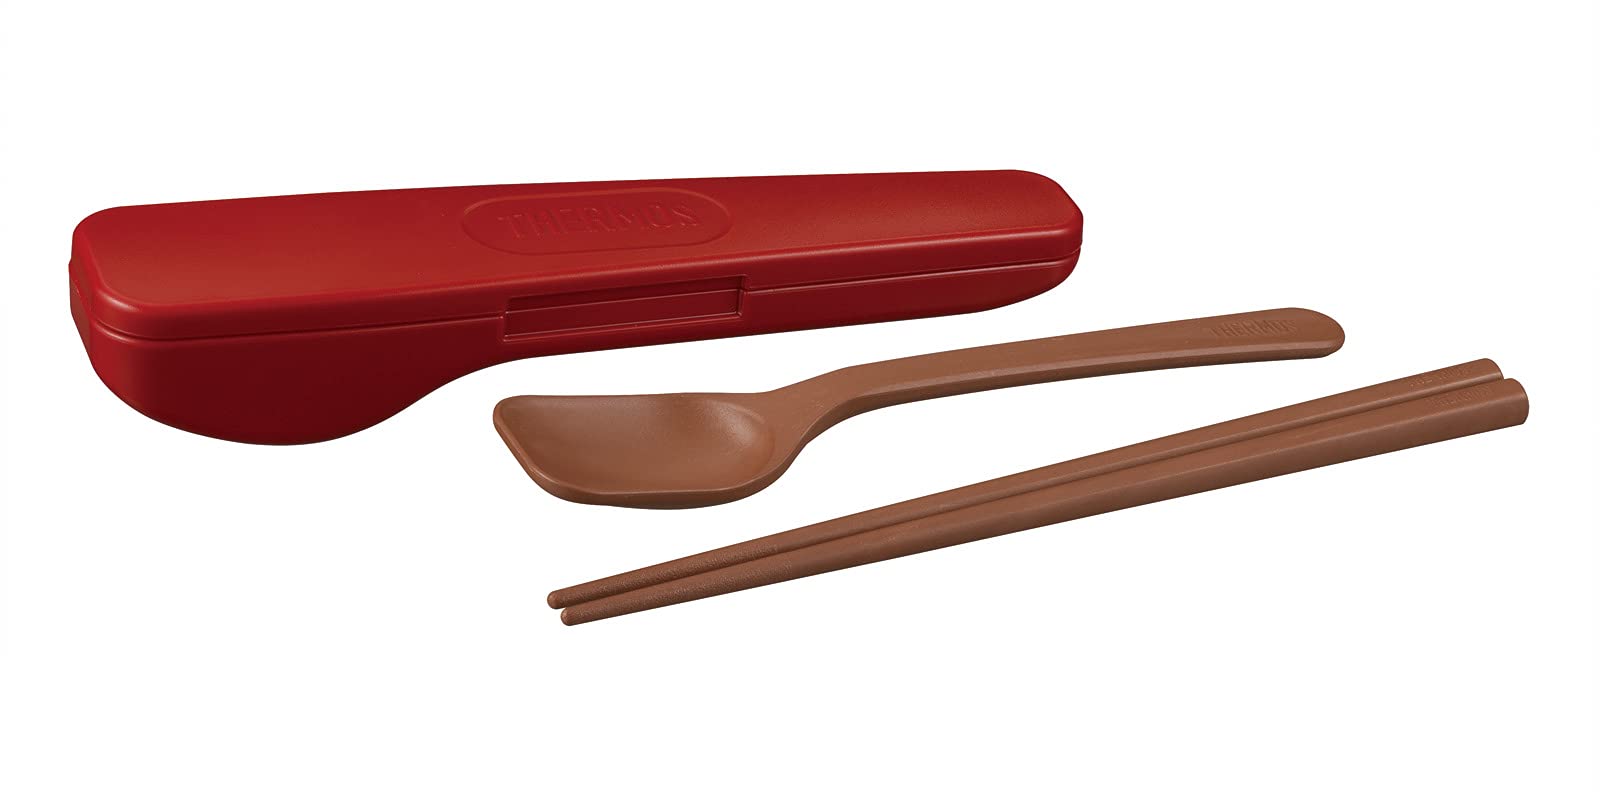 Thermos Spoon Hashi Set Deep Red CPE-001 Dr